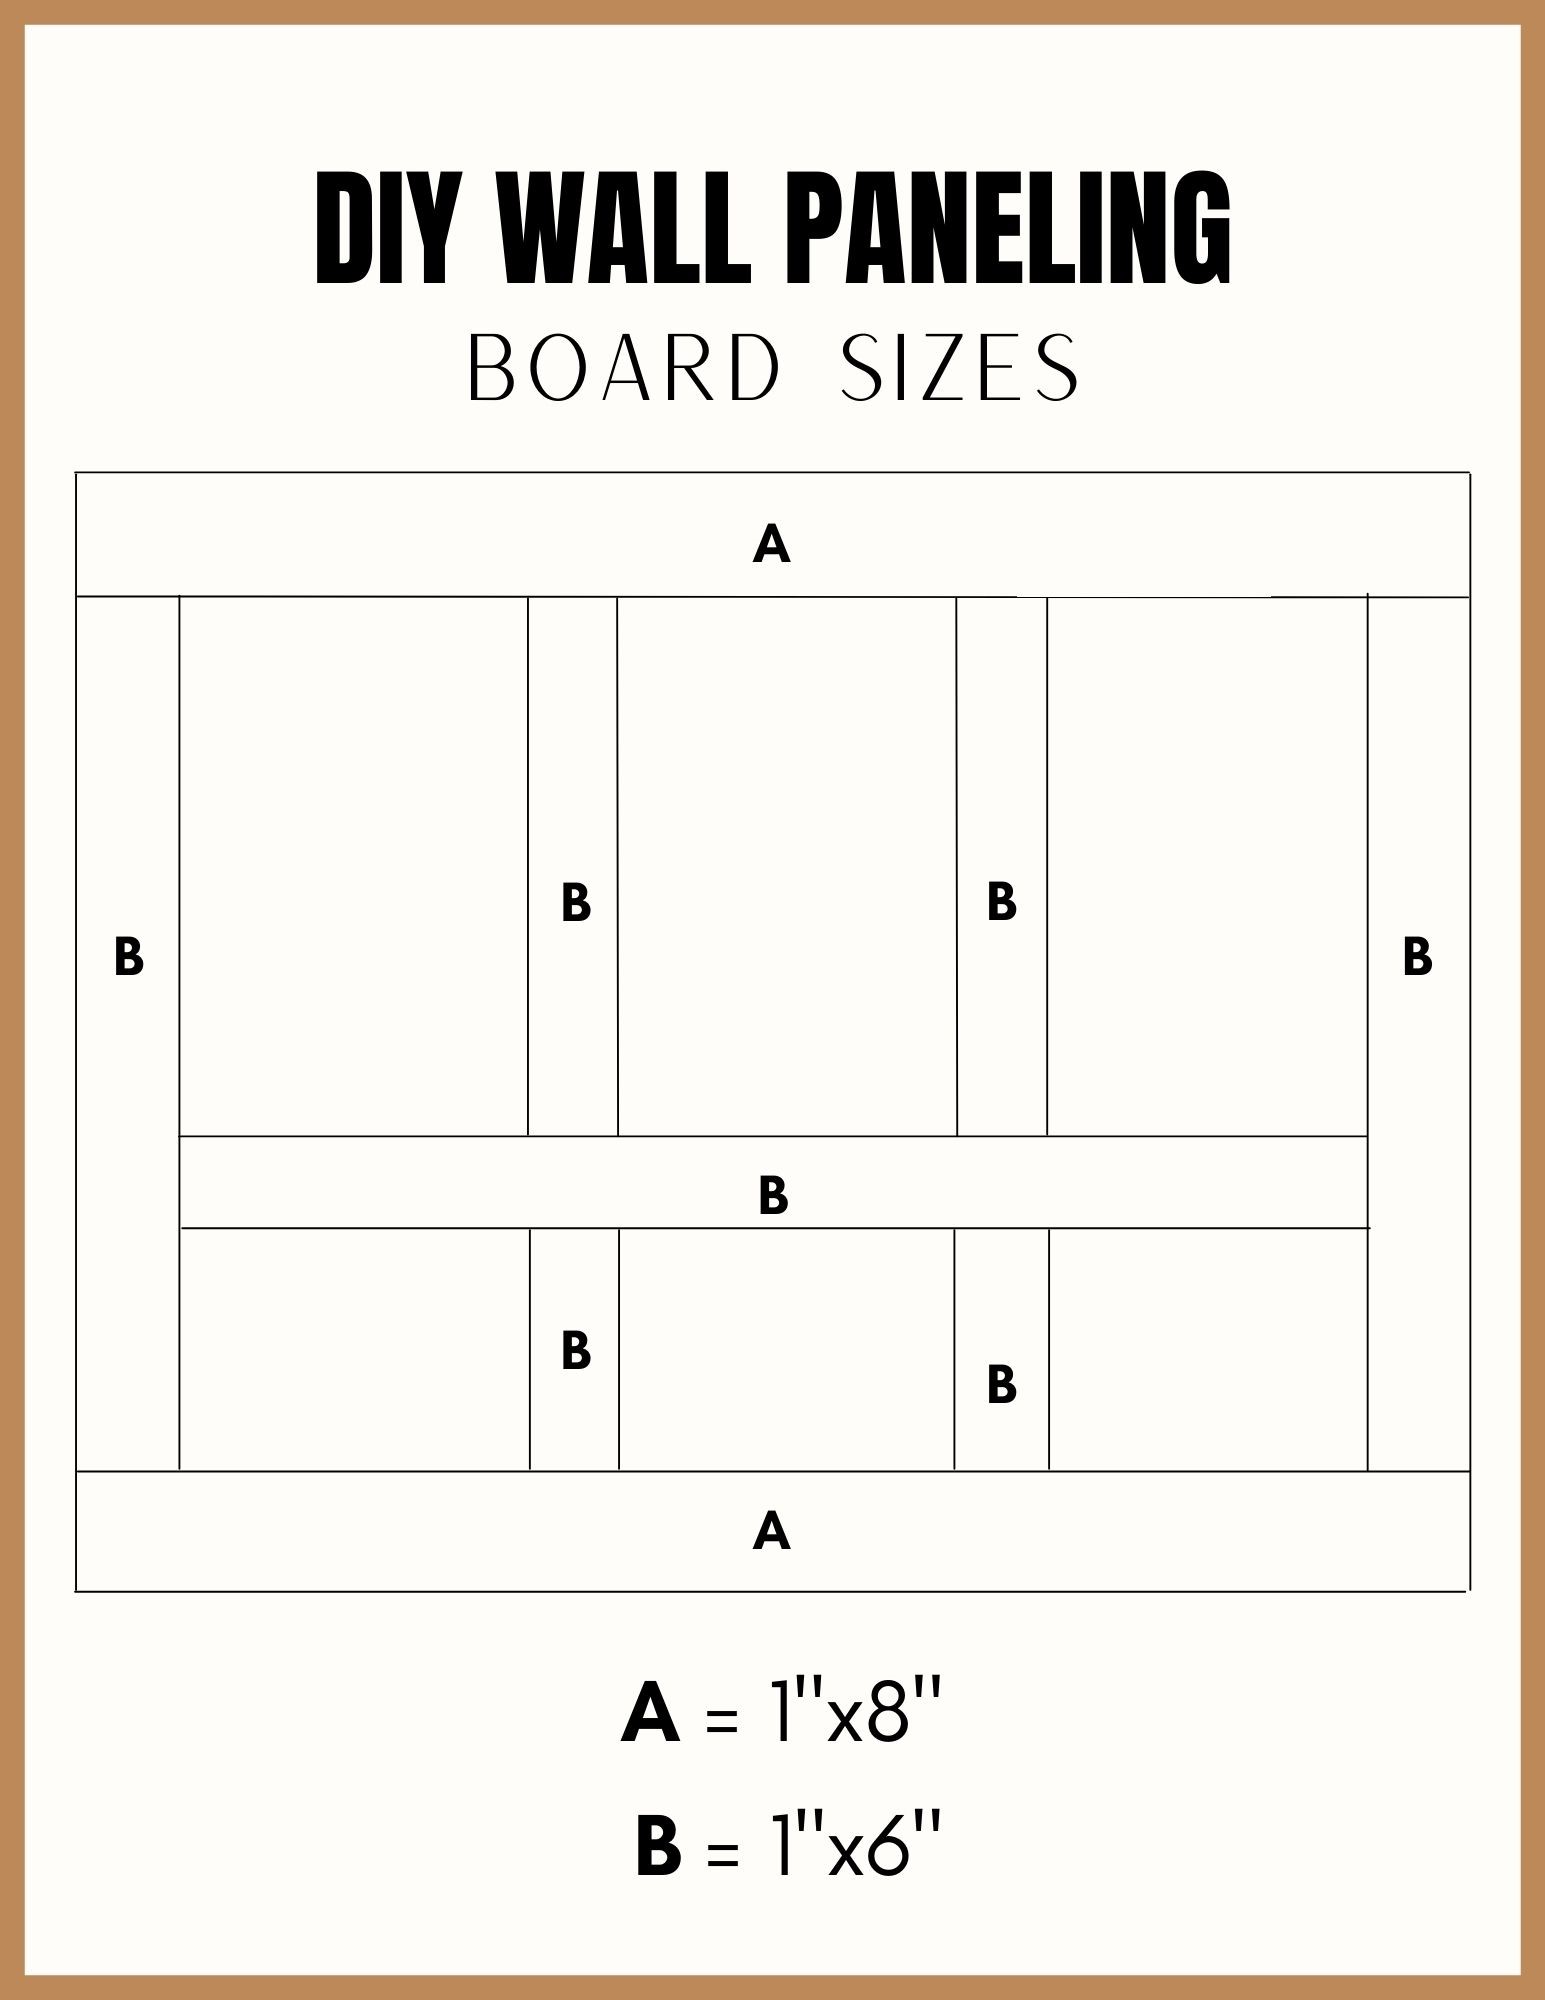 DIY Accent Wall Paneling Board Sizes